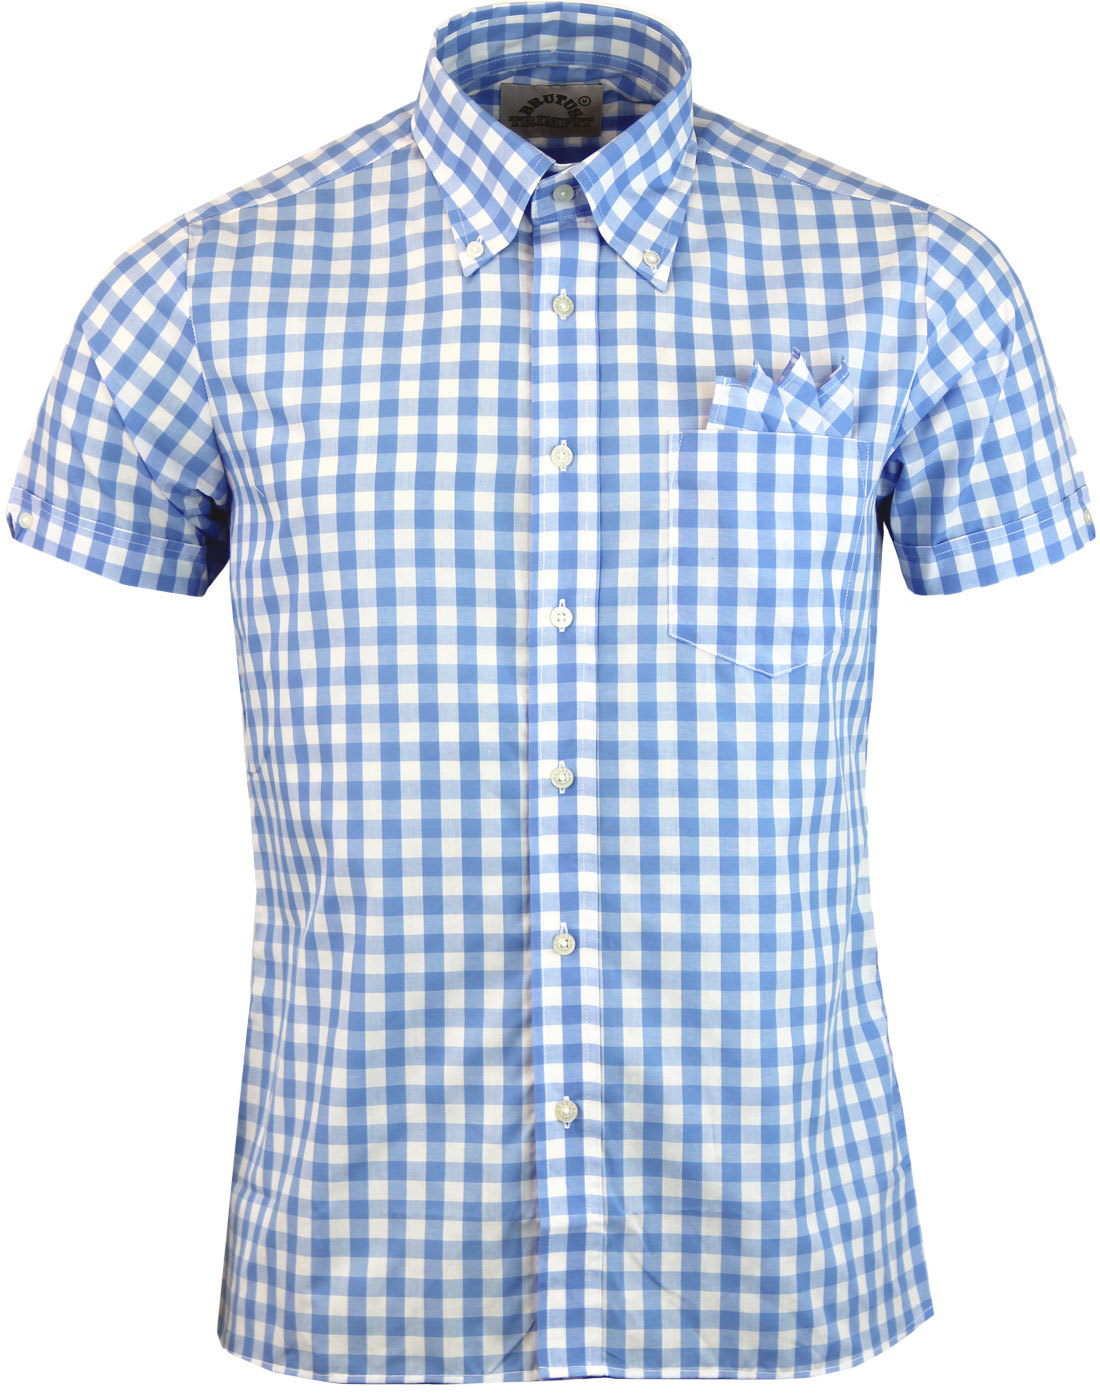 BRUTUS TRIMFIT Mod Button Down Large Gingham Check Shirt in Sky